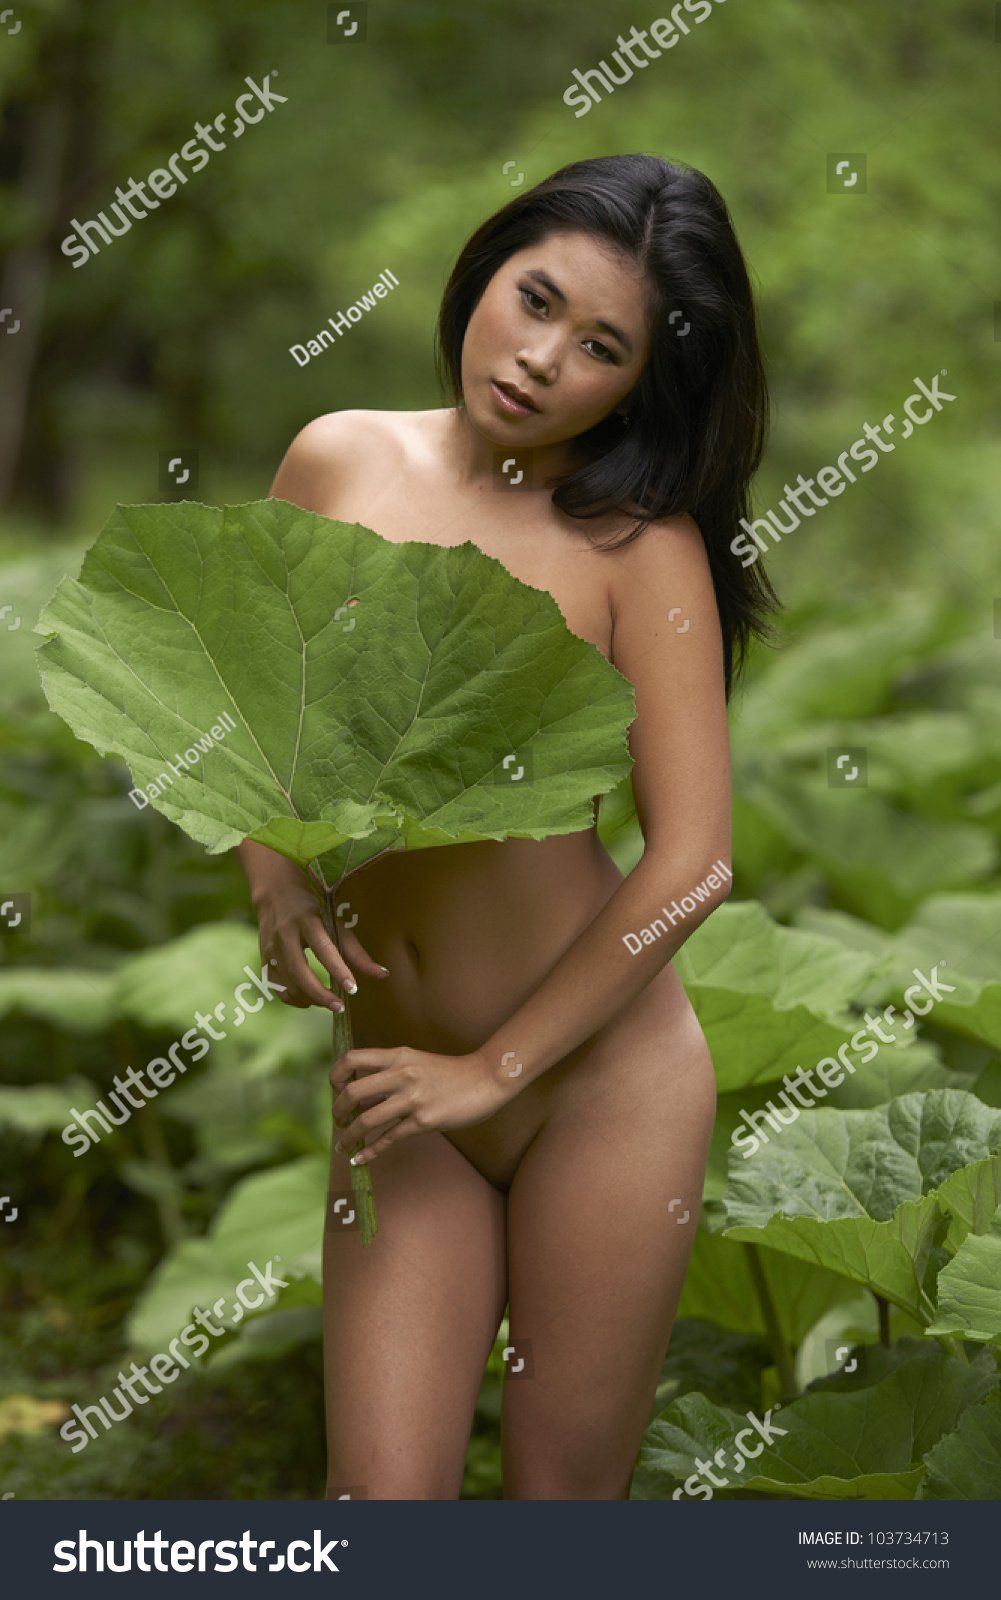 Dark M. reccomend Young leaf girls nude images